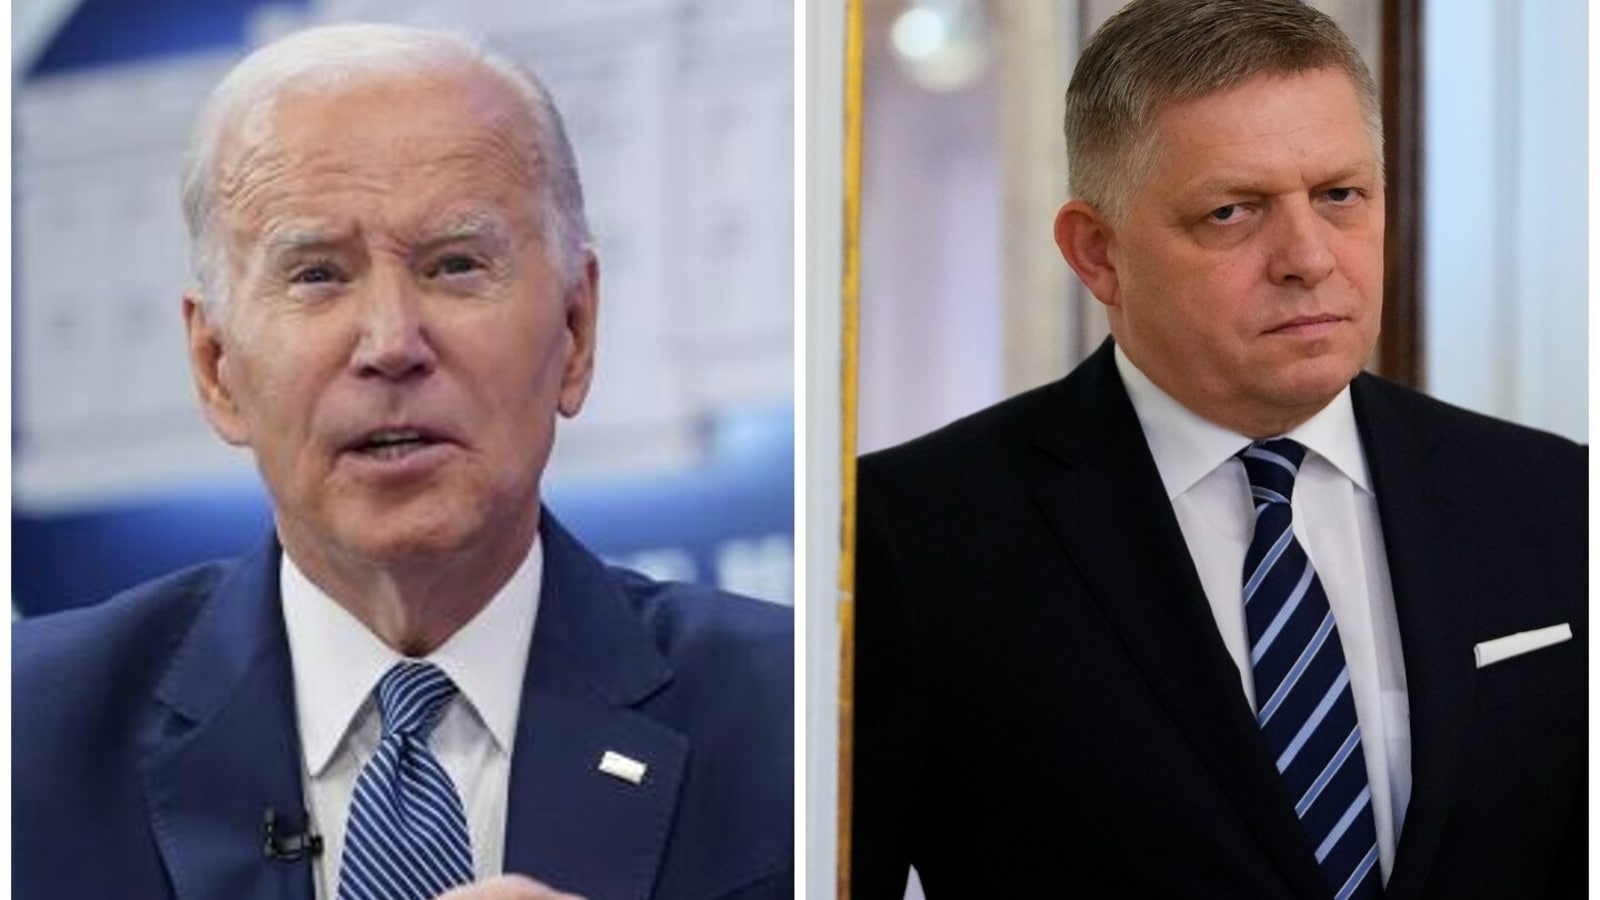 Biden says he is ‘alarmed’ after horrific attack on Slovakian PM Robert Fico, wishes him speedy recovery